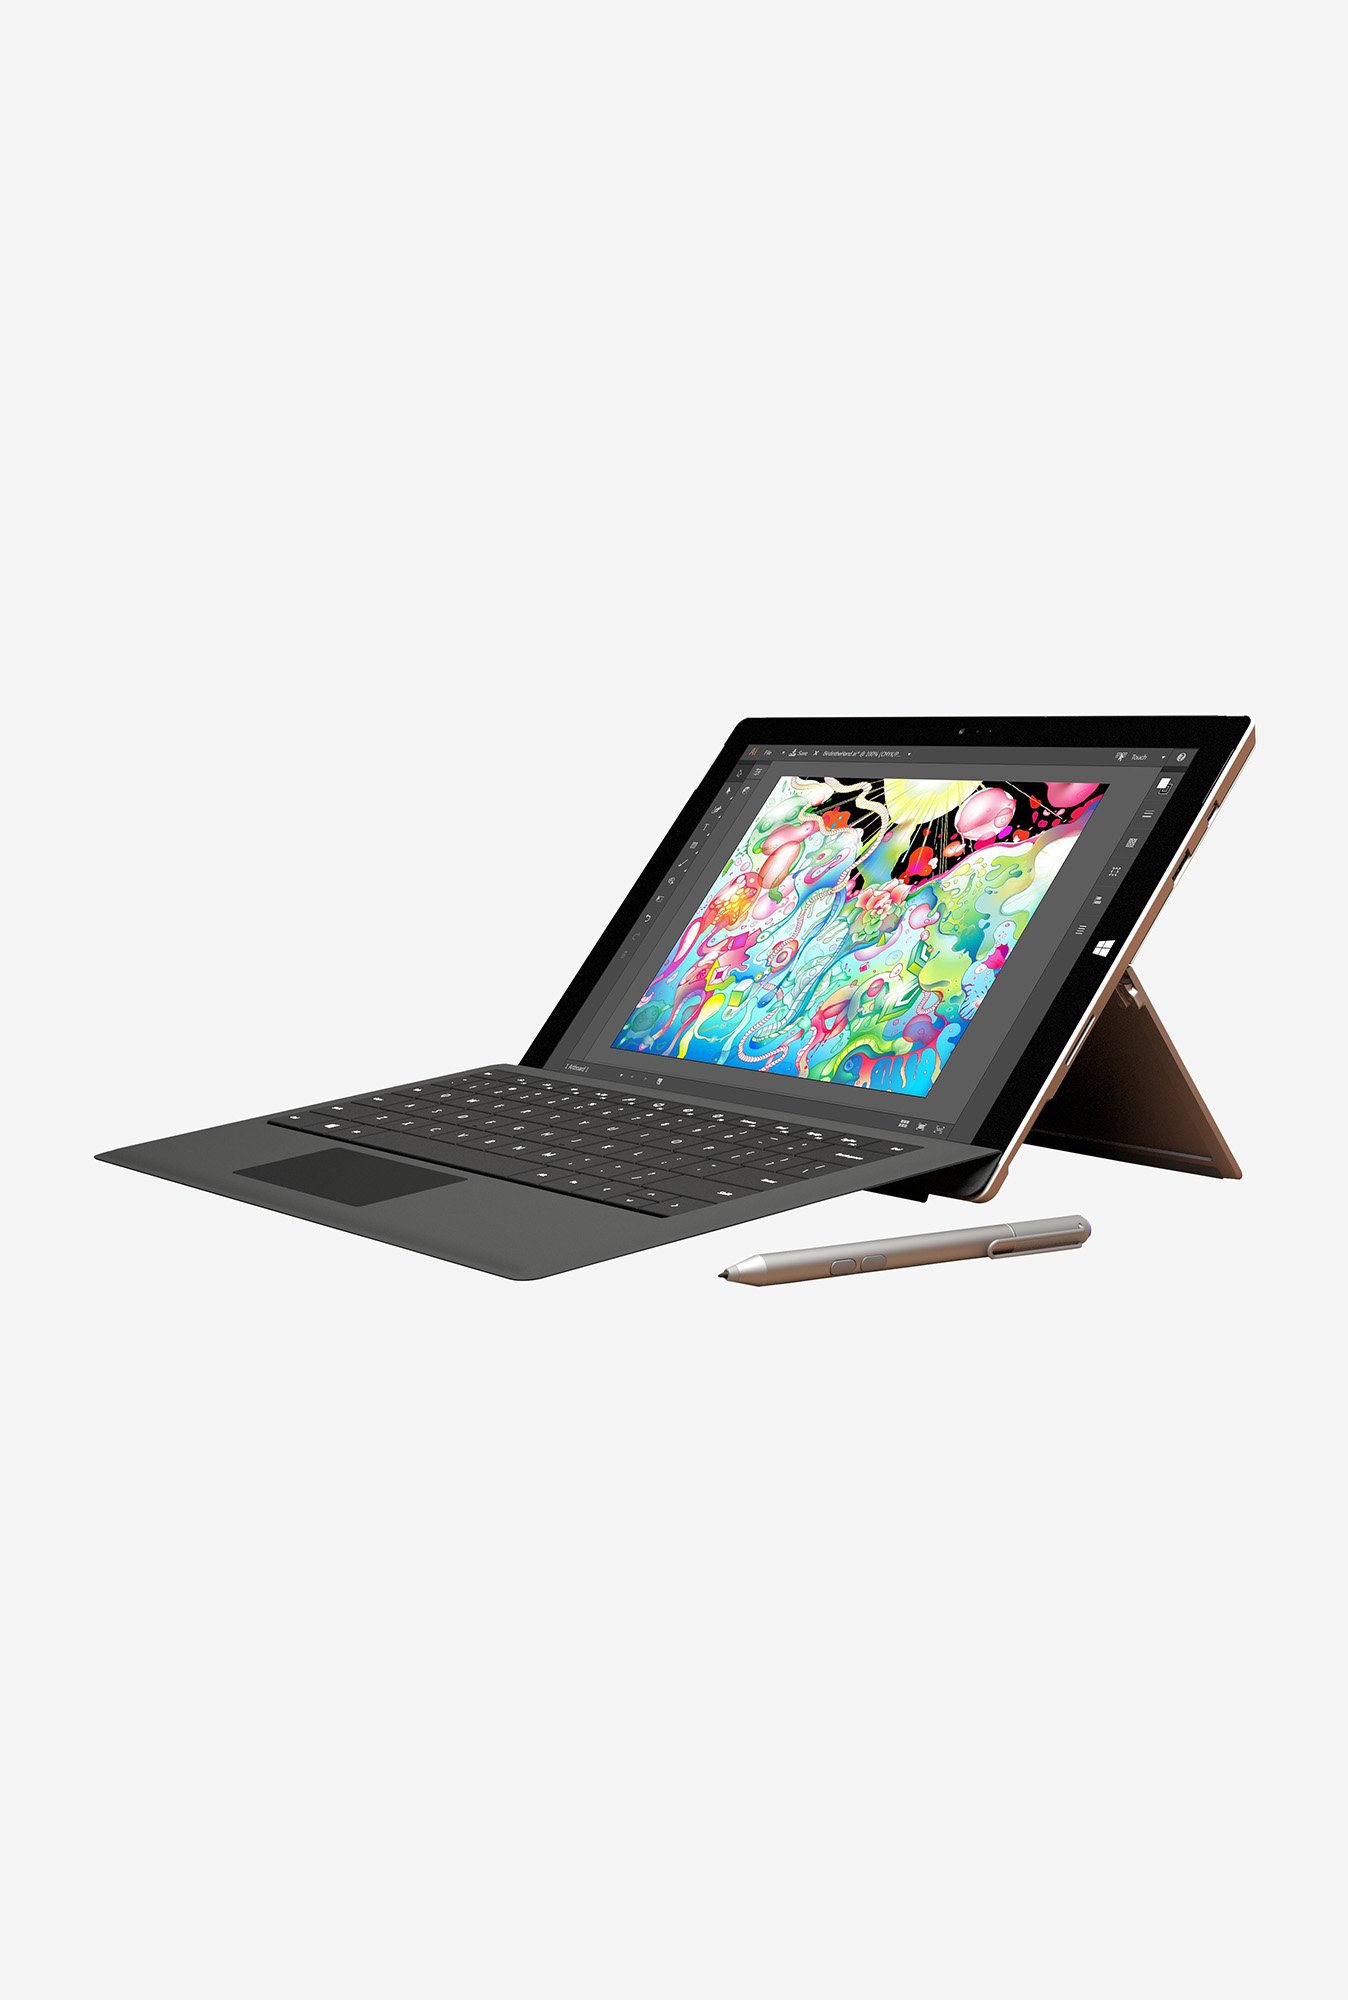 Buy Microsoft Surface Pro 4 I7 256 Gb With Black Type Cover Online At Best Price At Tatacliq